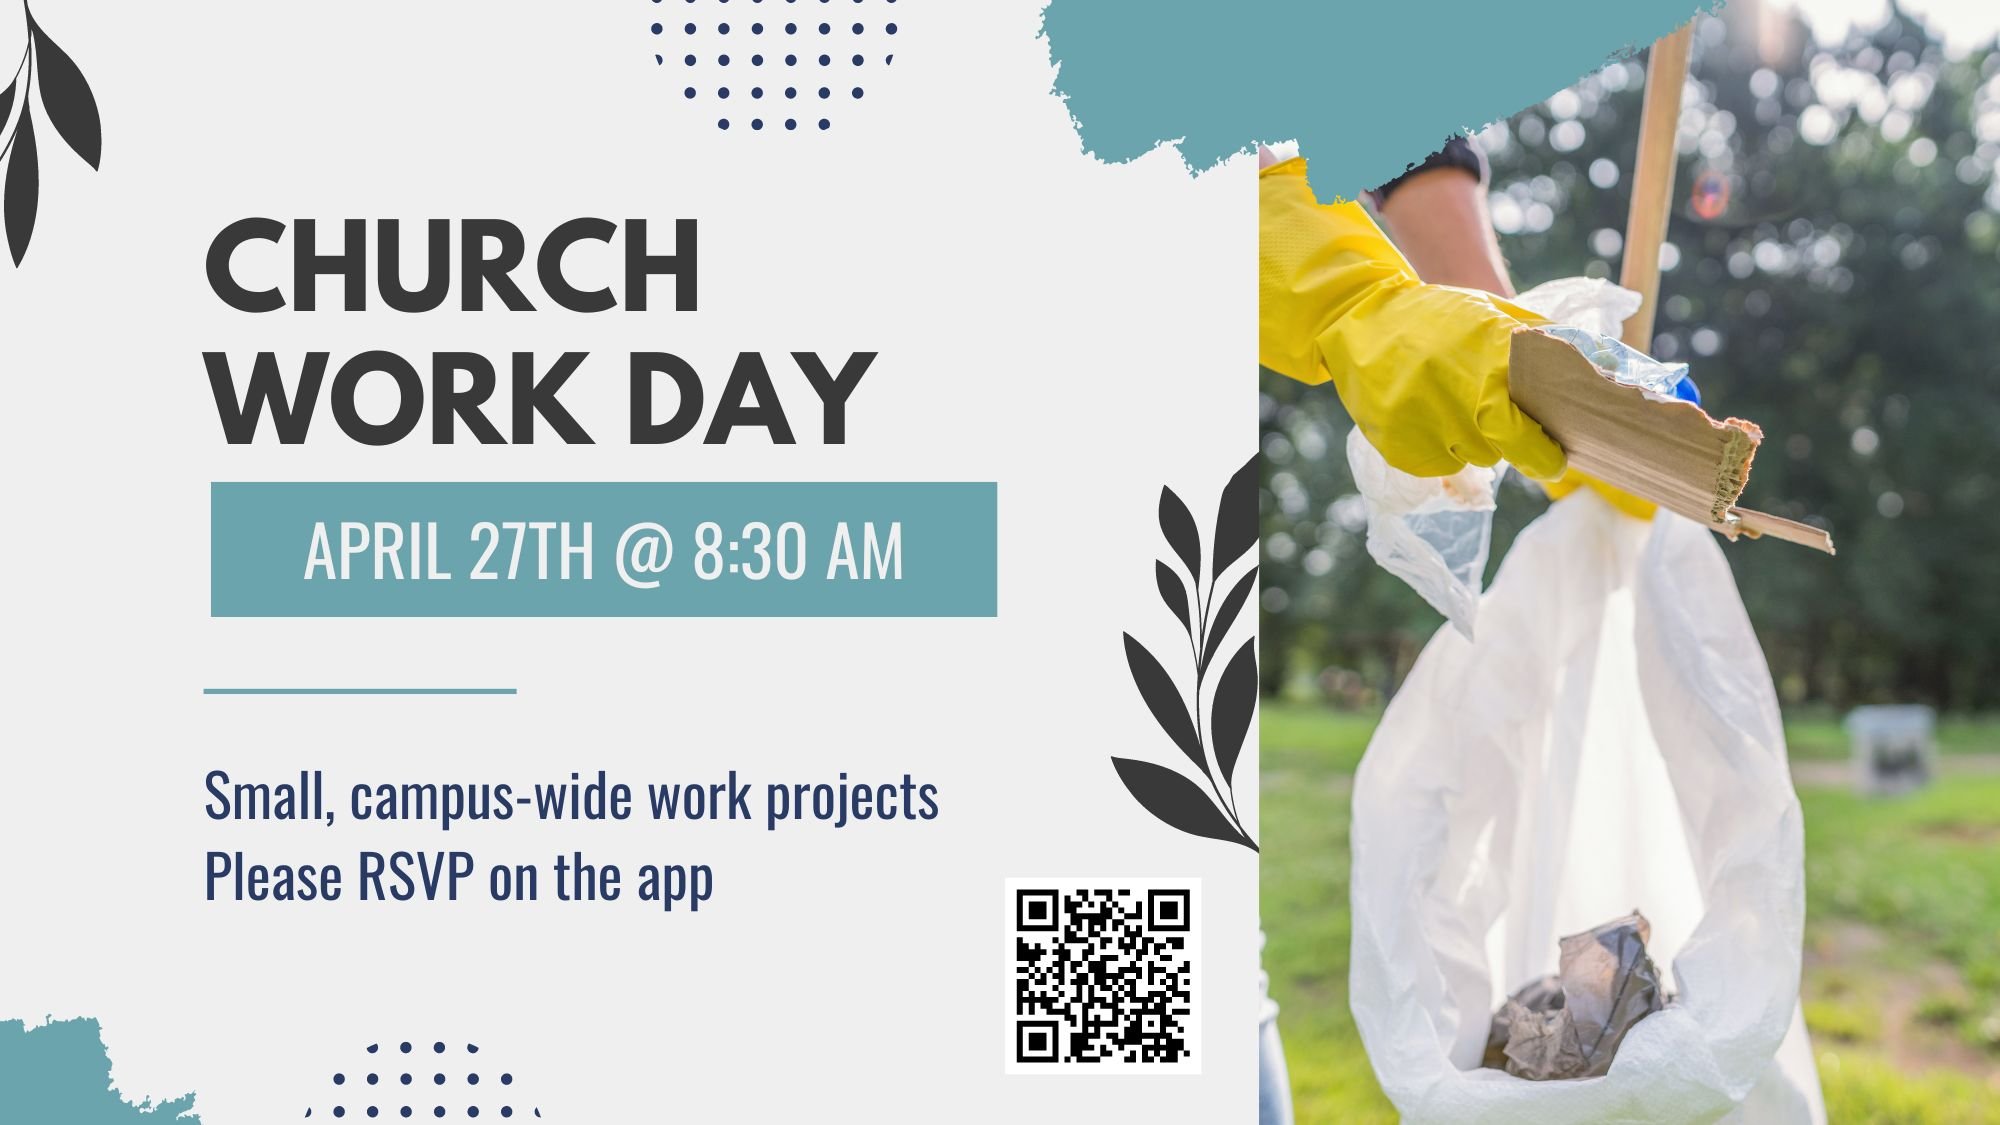 We have a Church work day tomorrow morning! We'll be working simple, small work projects across the campus for maintenance and upkeep. We'd love to have your help! RSVP at the link below.

https://subspla.sh/6pdjd5z/